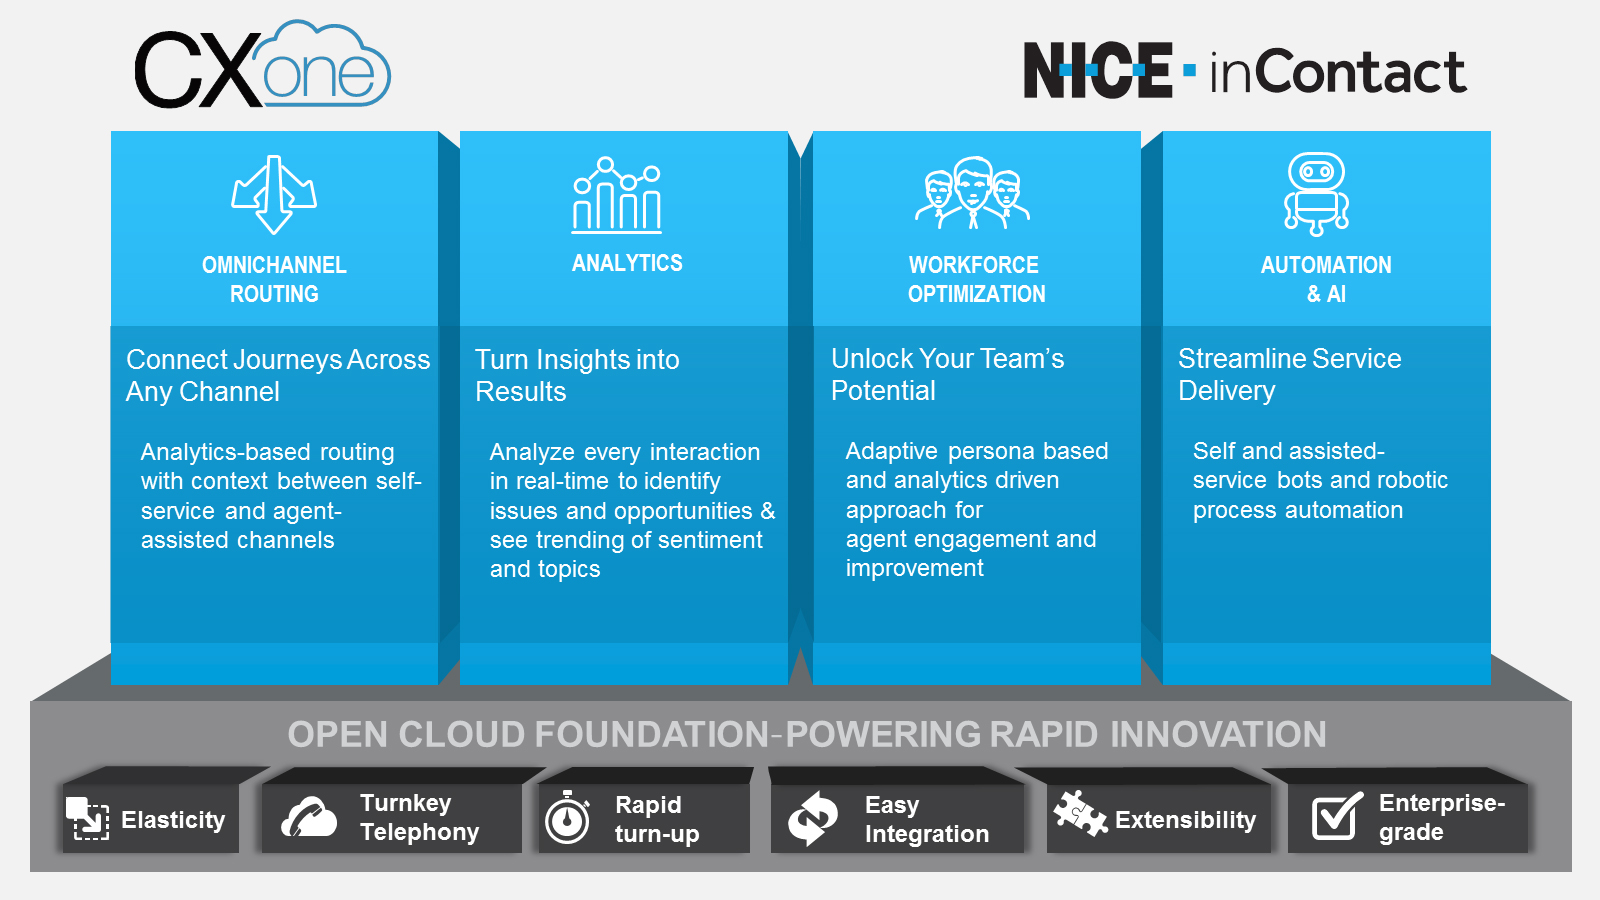 NICE inContact Takes a New Path with CXOne, Their First Jointly